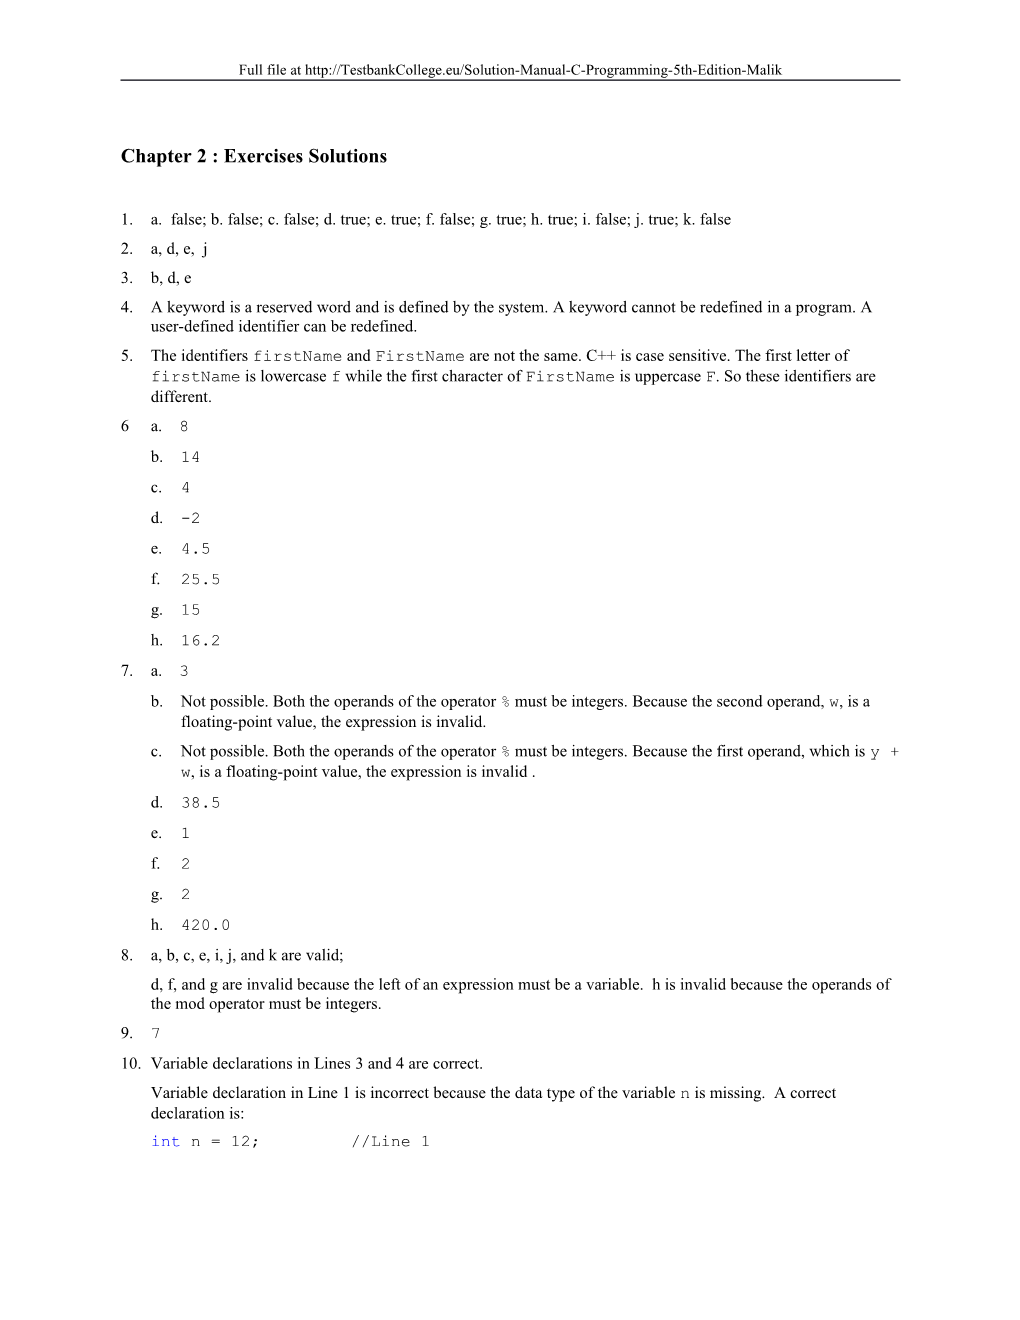 Chapter 2: Exercises Solutions